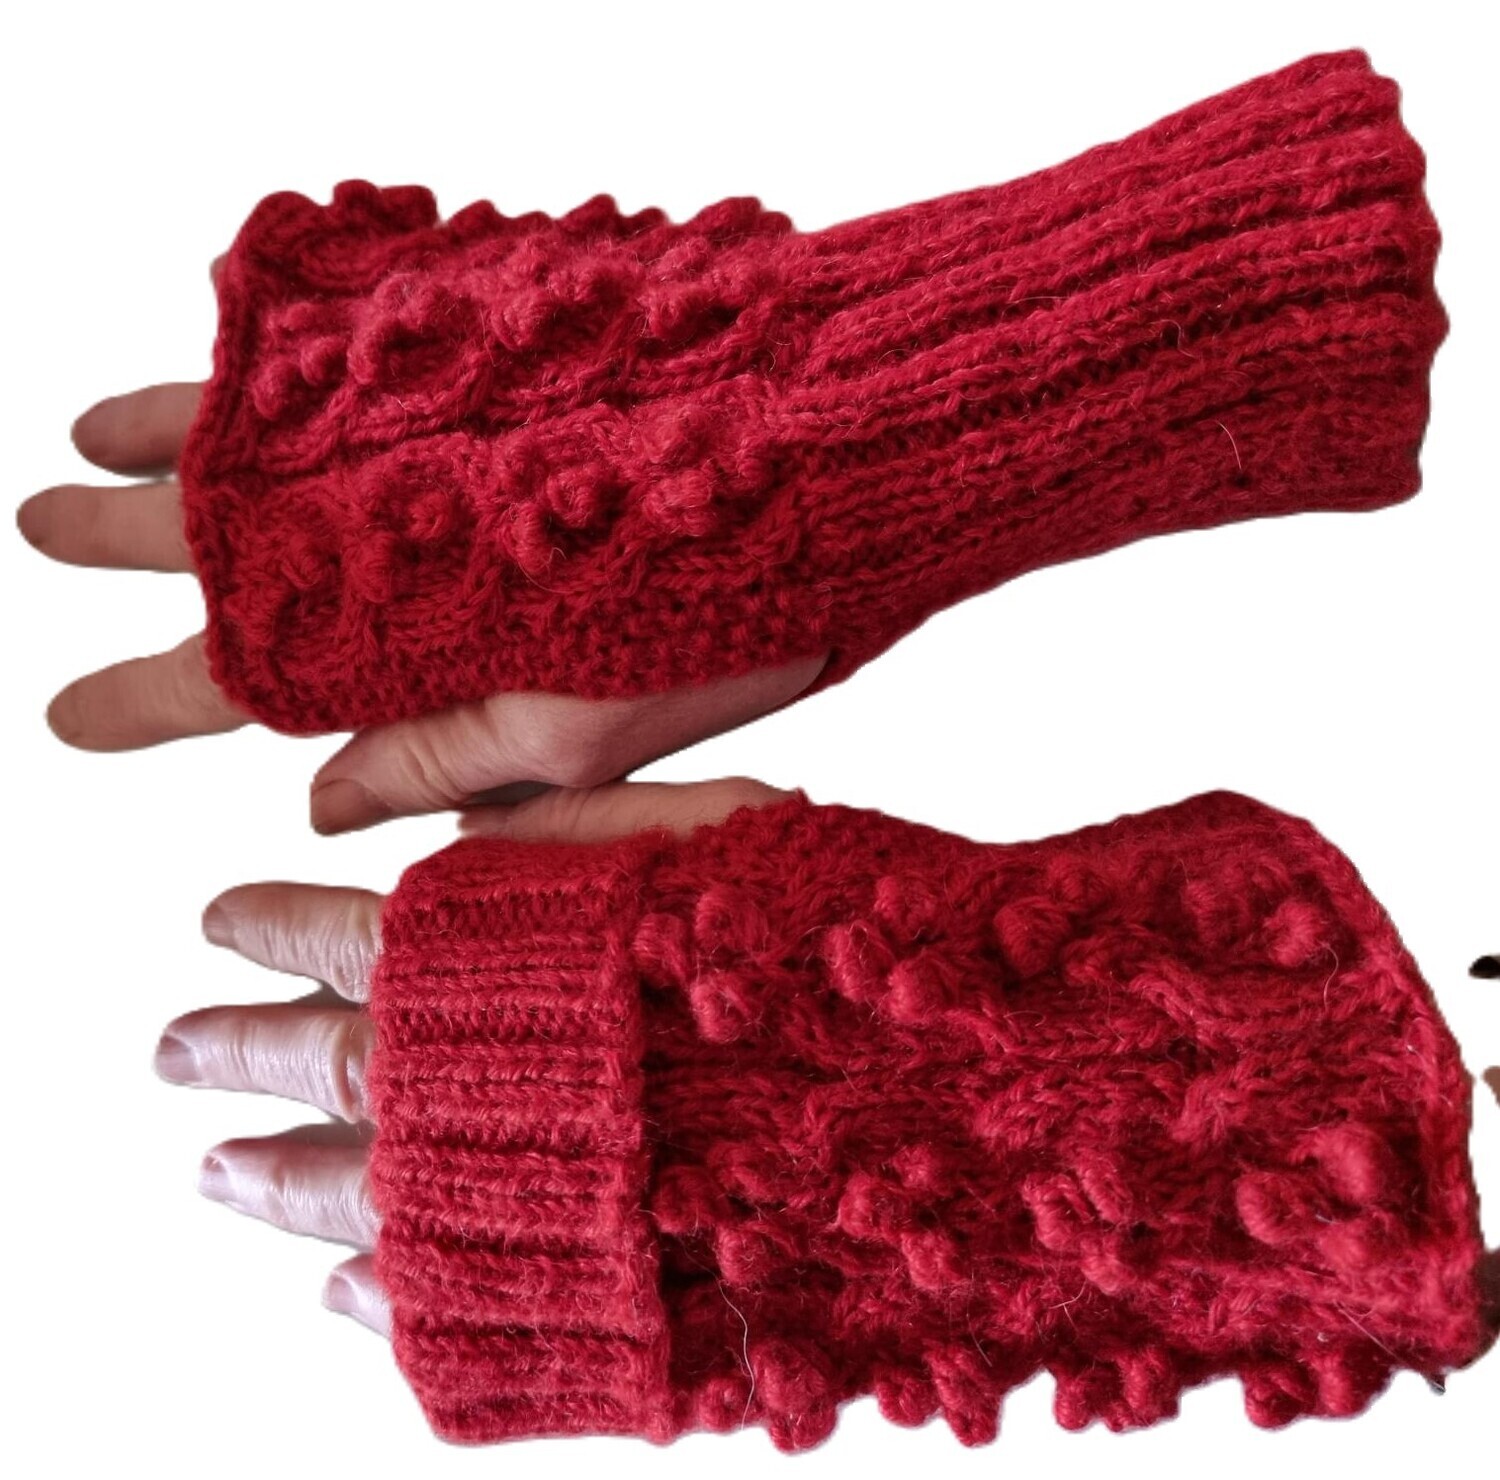 SUMMER HEAT ??? 1/2 PRICE Australian Alpaca MITTENS, fingerless open end. Luxuriously soft durable warm. Ideal for working! Aussie knits in cable or cable/bobbles pattern. RRP $30.00, now only ...